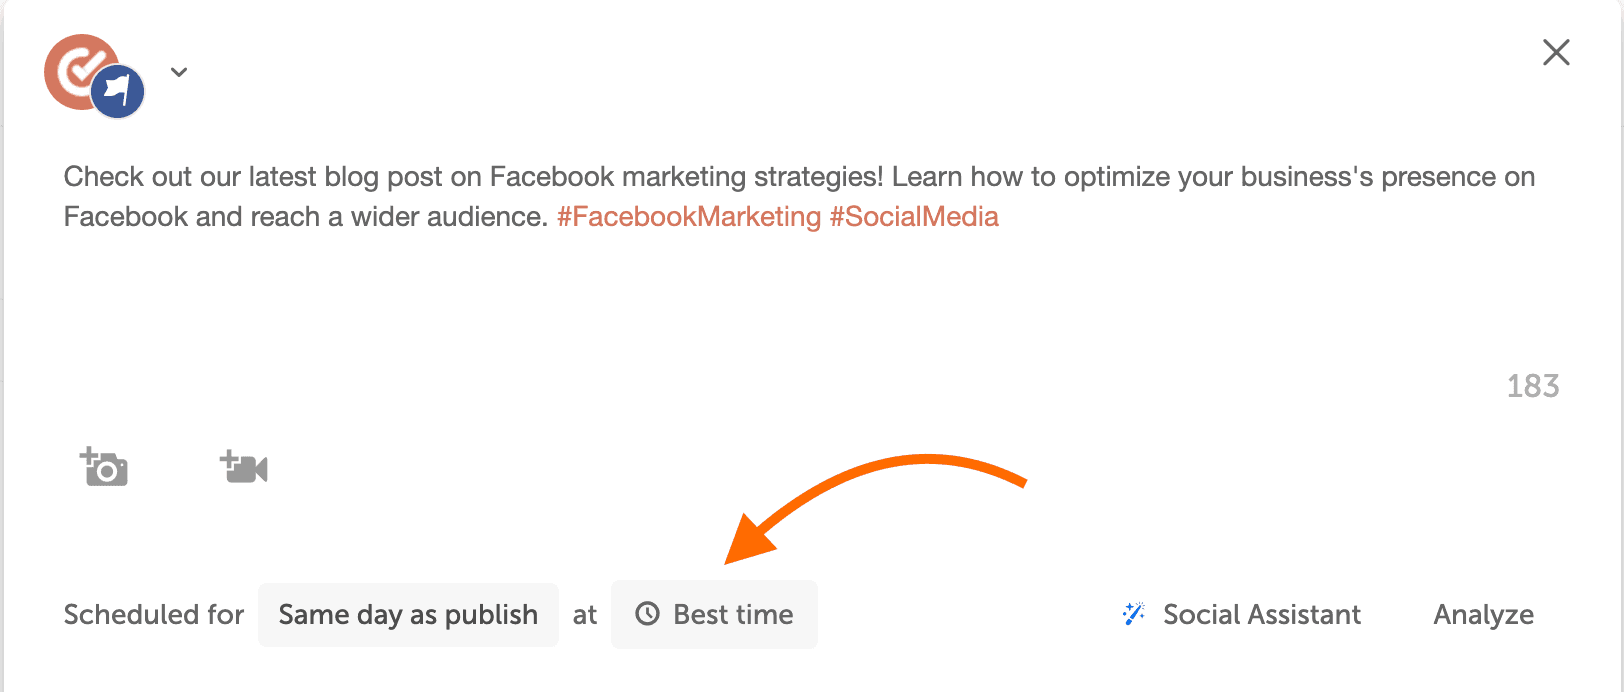 Red arrow pointing to "Best time" for post scheduling in CoSchedule Social Calendar